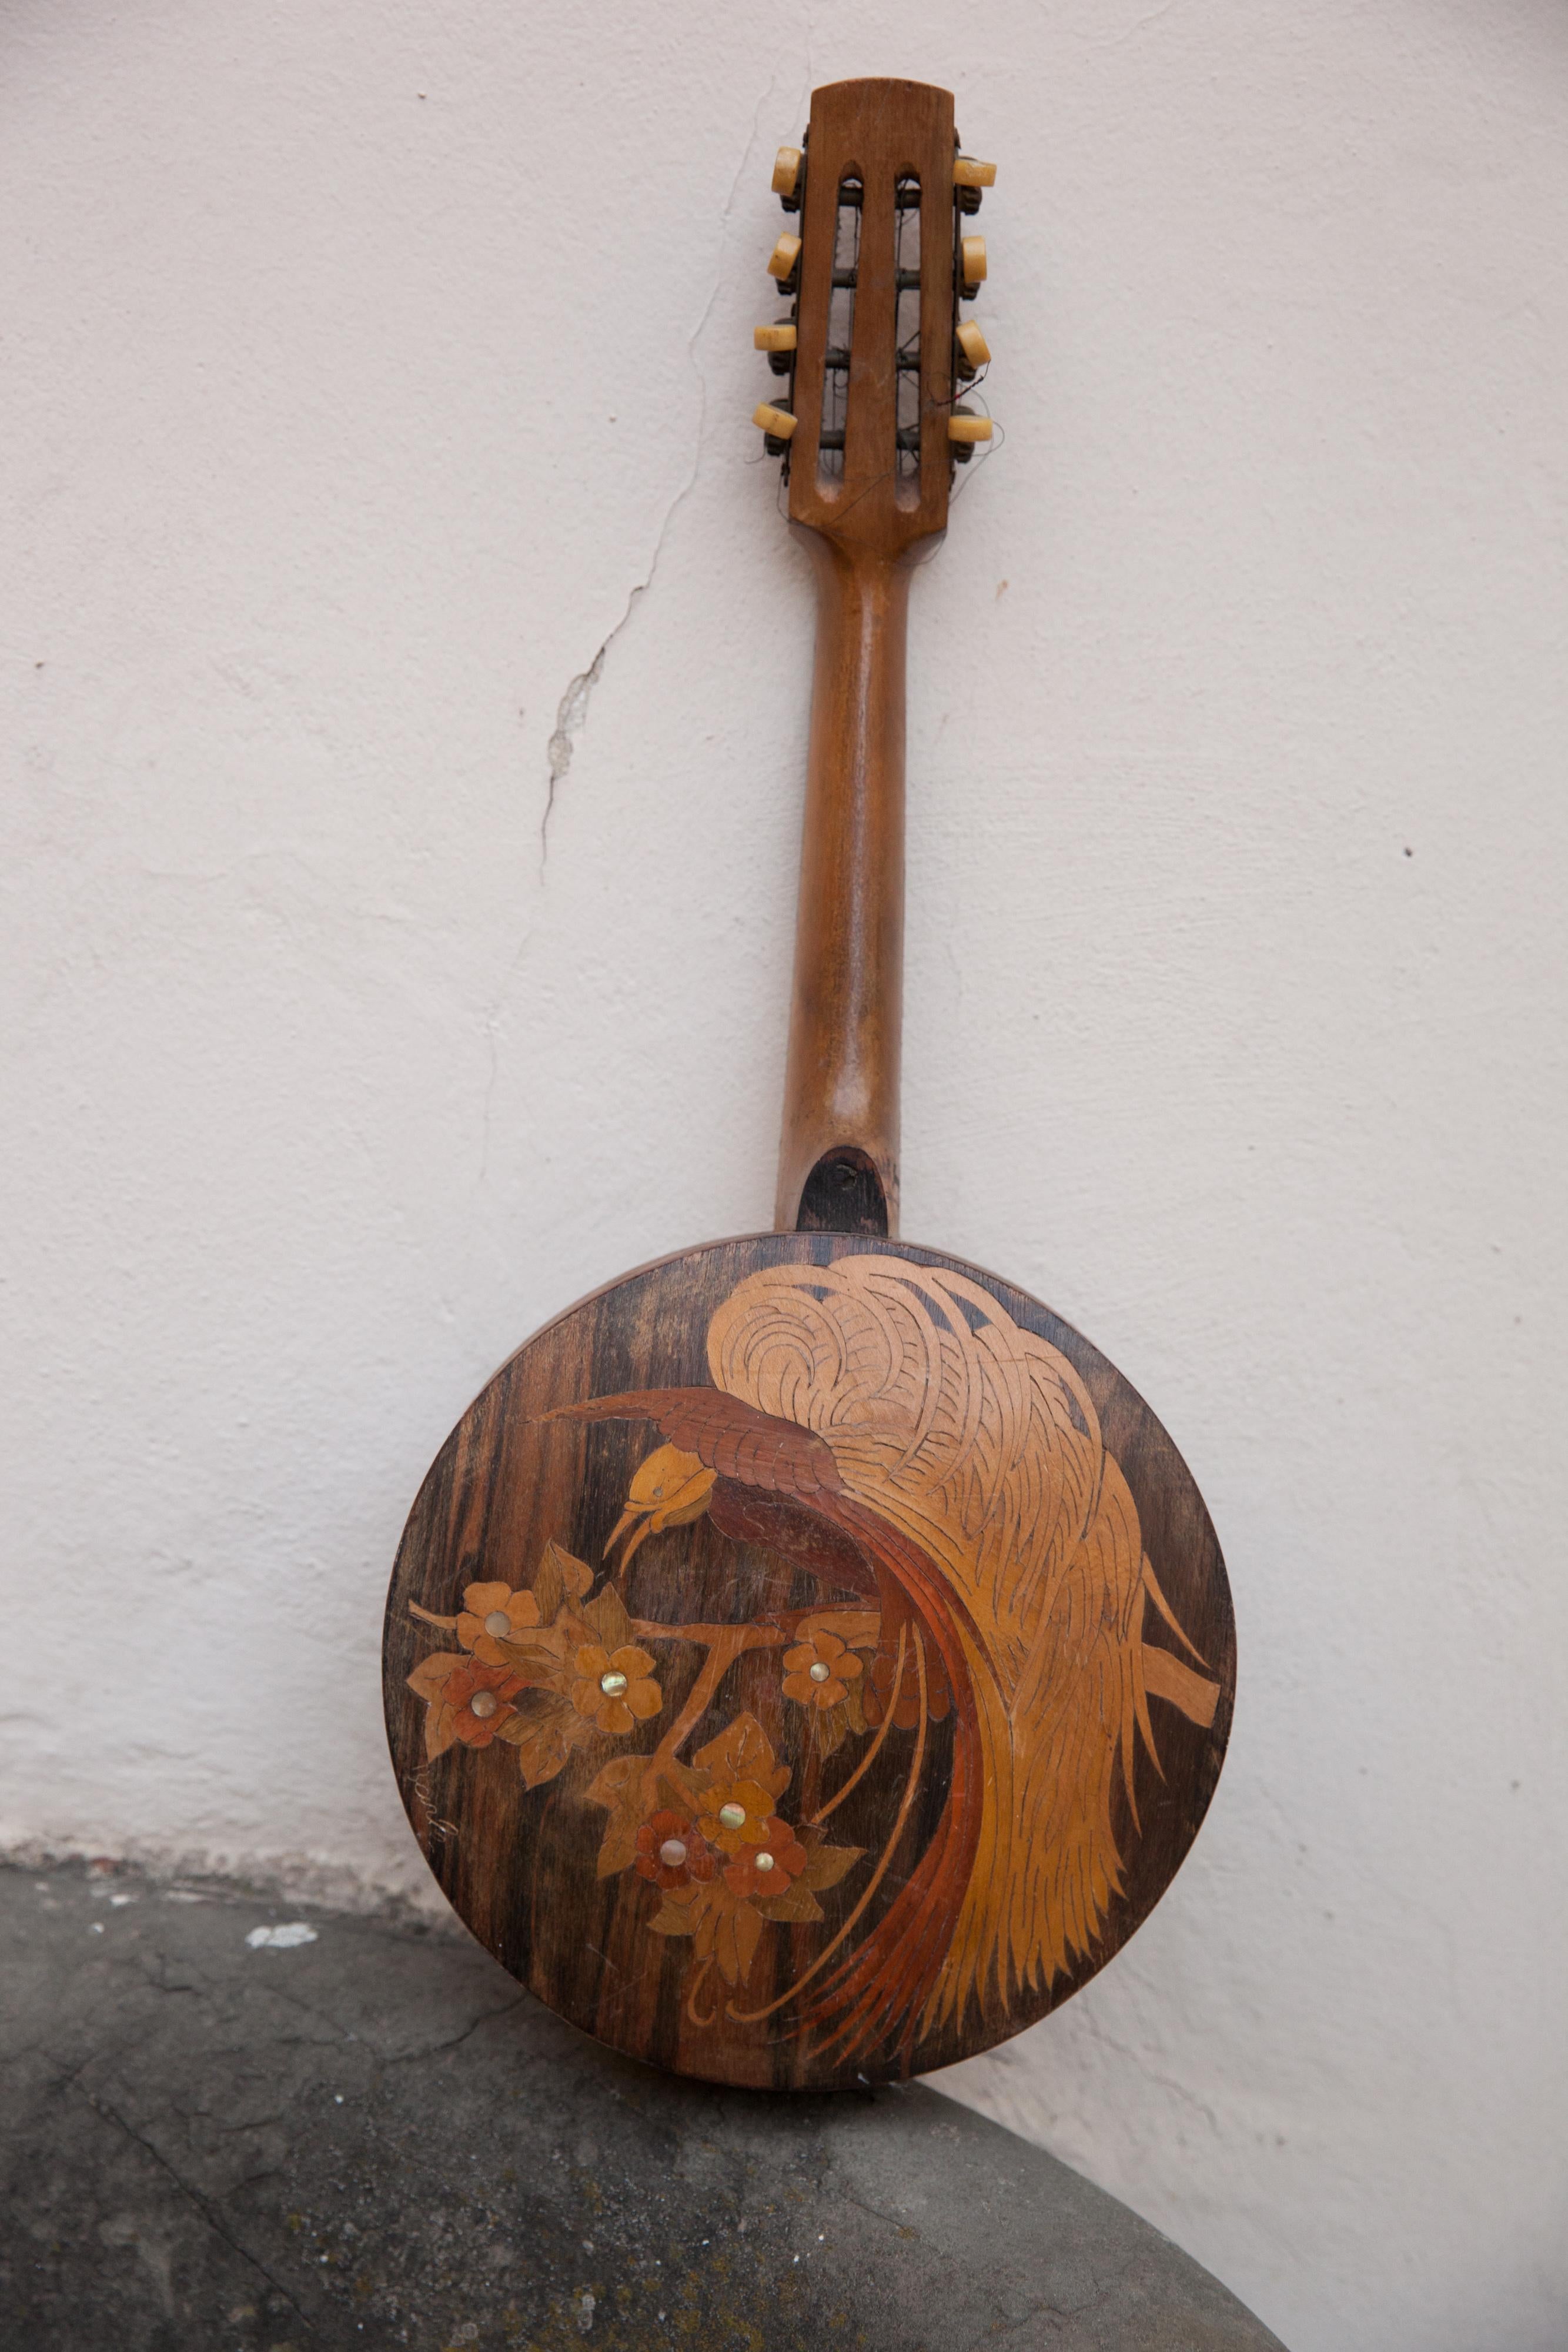 Banjo. Art Deco era musical instrument to be restored in inlaid wood.

Signed on the handle Achille Jacomoni, the signature is made with the pyrographed technique.

Materials: Wood, metal, parchment.
A bird that has exotic and fairy-like